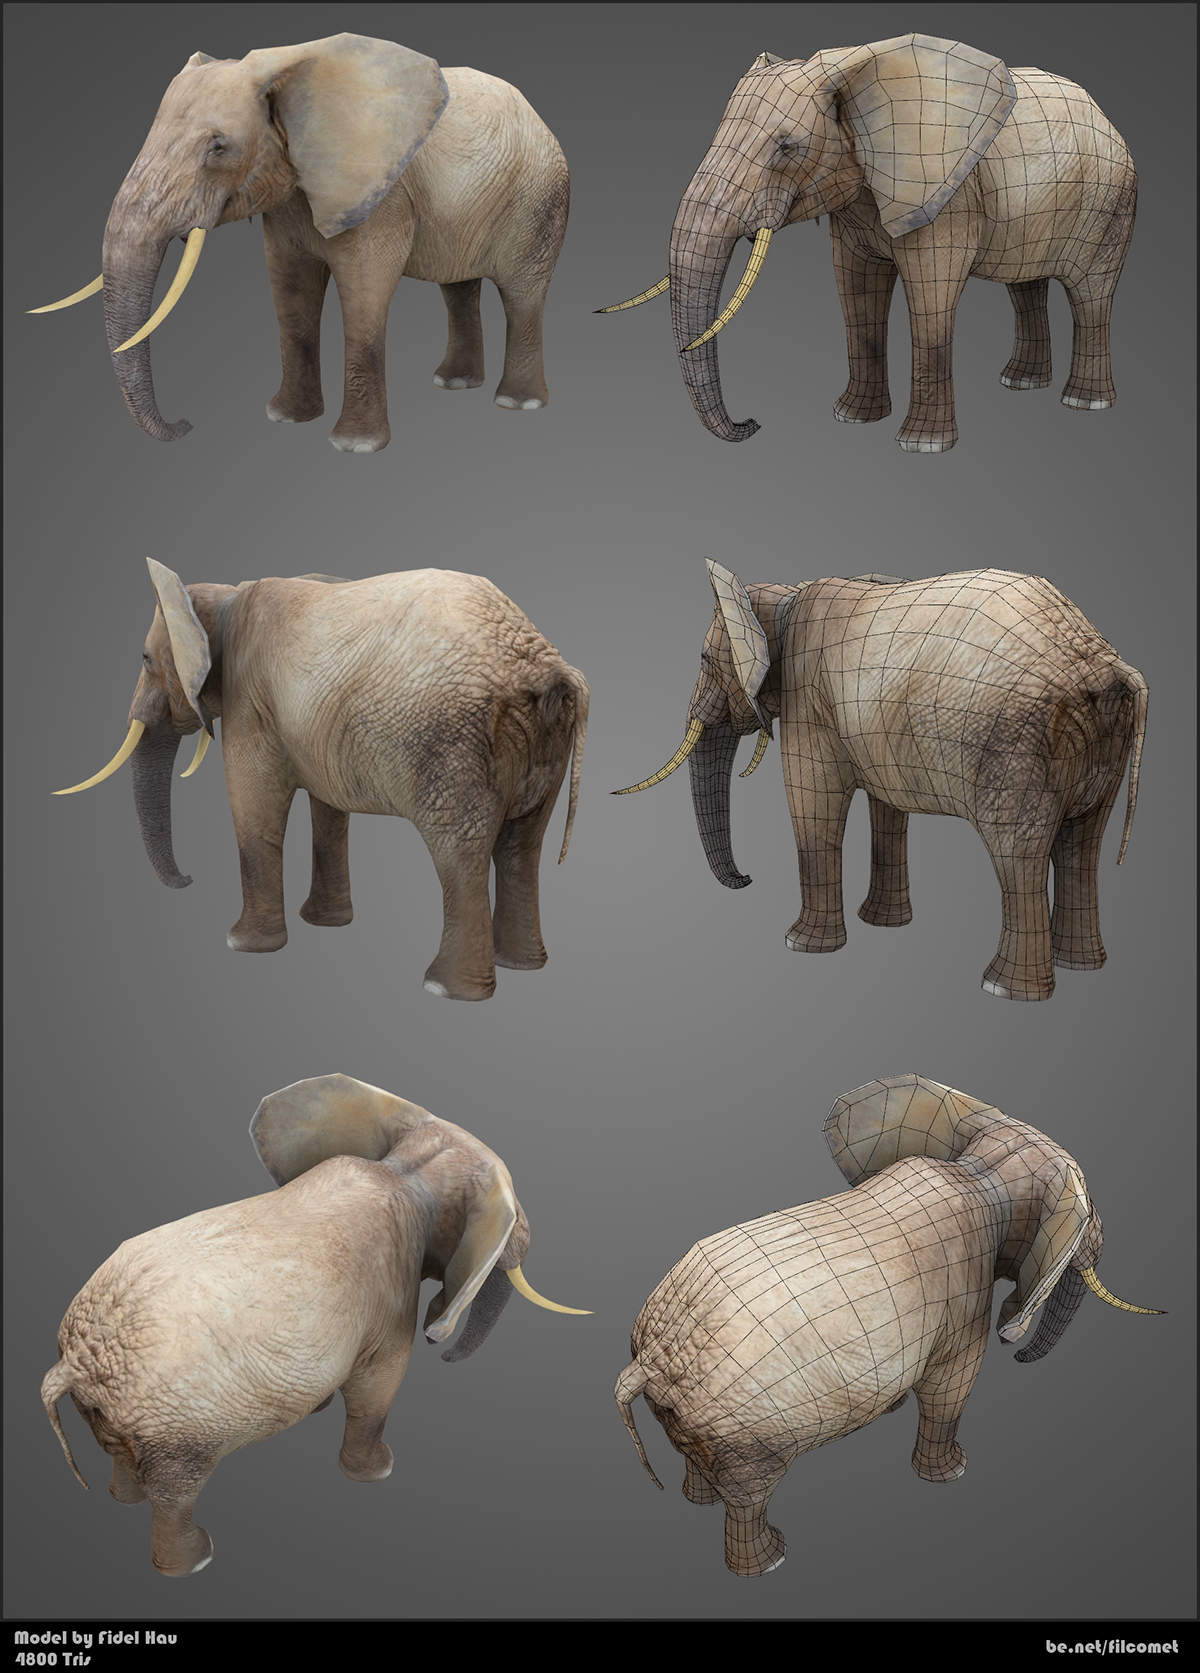 elephant 3D animals zoo augmented reality dolphin tiger africa desert lowpoly mobile game app texturing prop Game Art